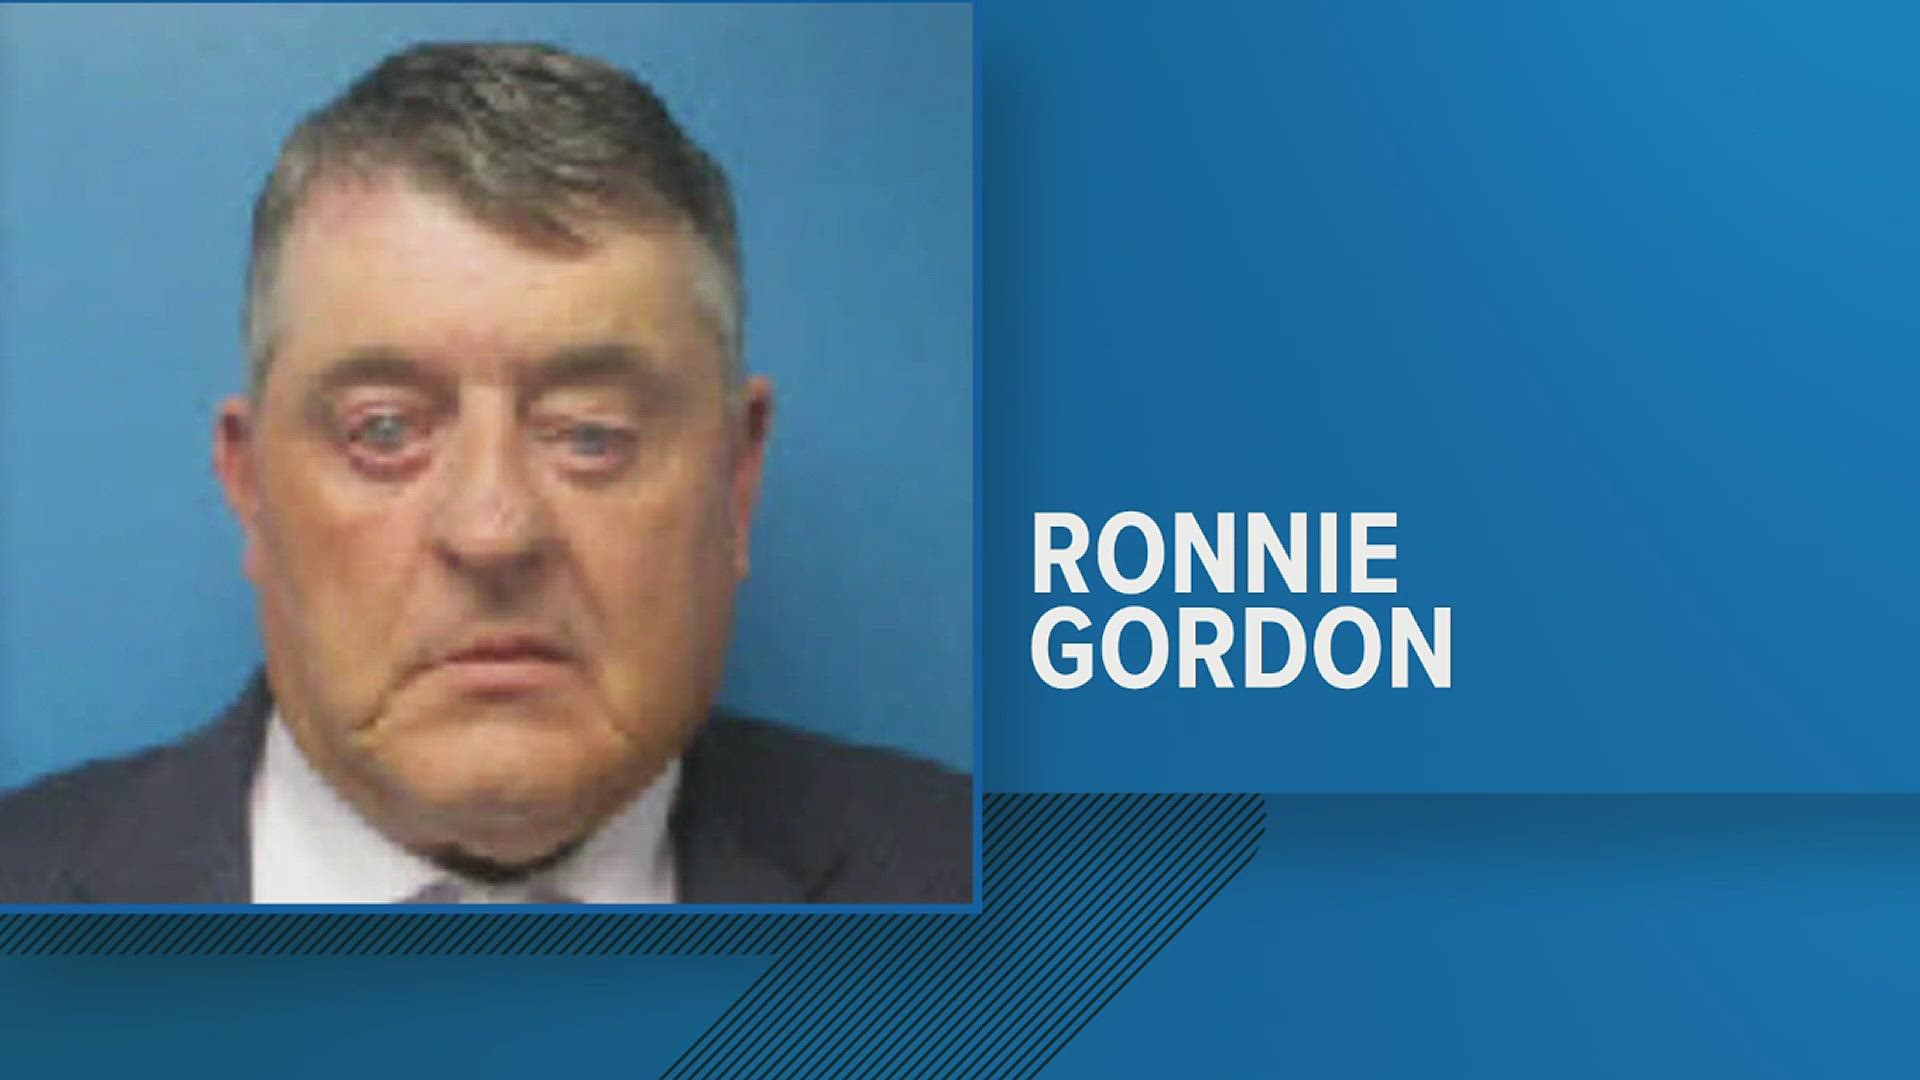 Ronnie Lee Gordon received what may Hardin County's longest sentence ever after a jury found him guilty of committing sex crimes against children.